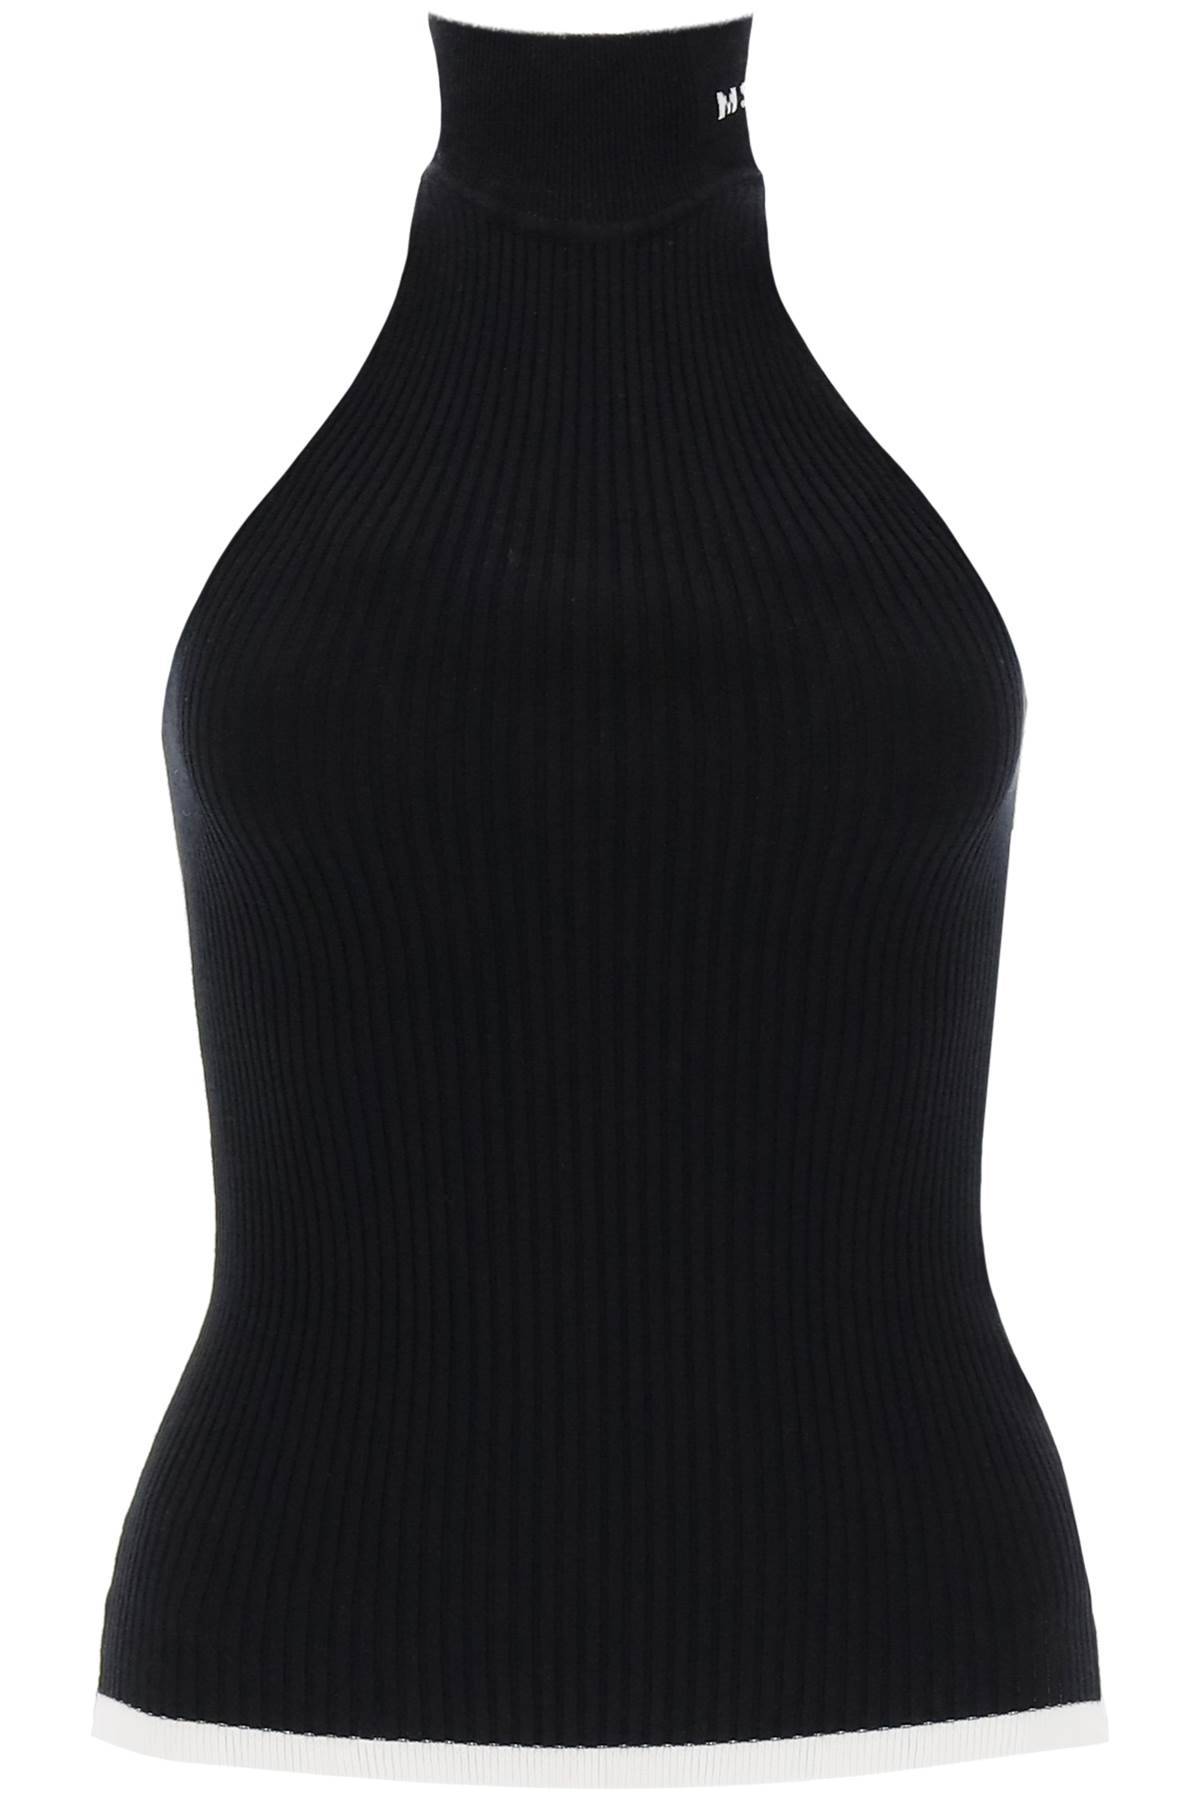 Msgm MSGM ribbed tank top with halterneck